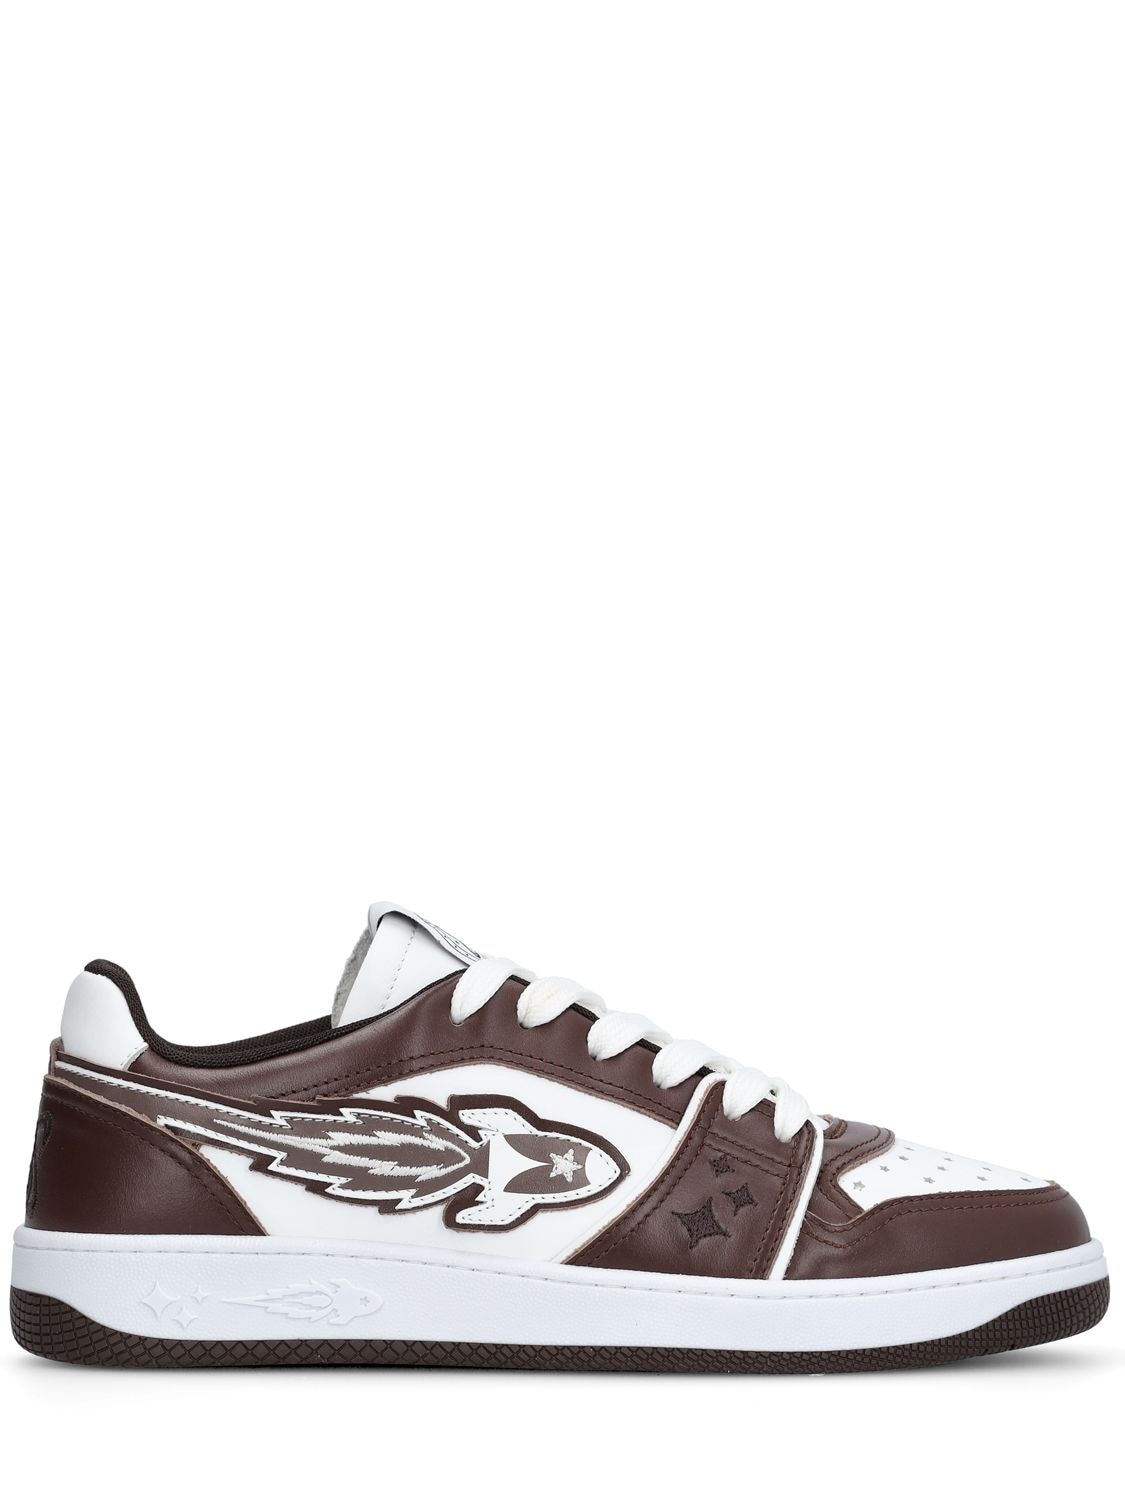 Enterprise Japan Low Logo Trainers In White,brown